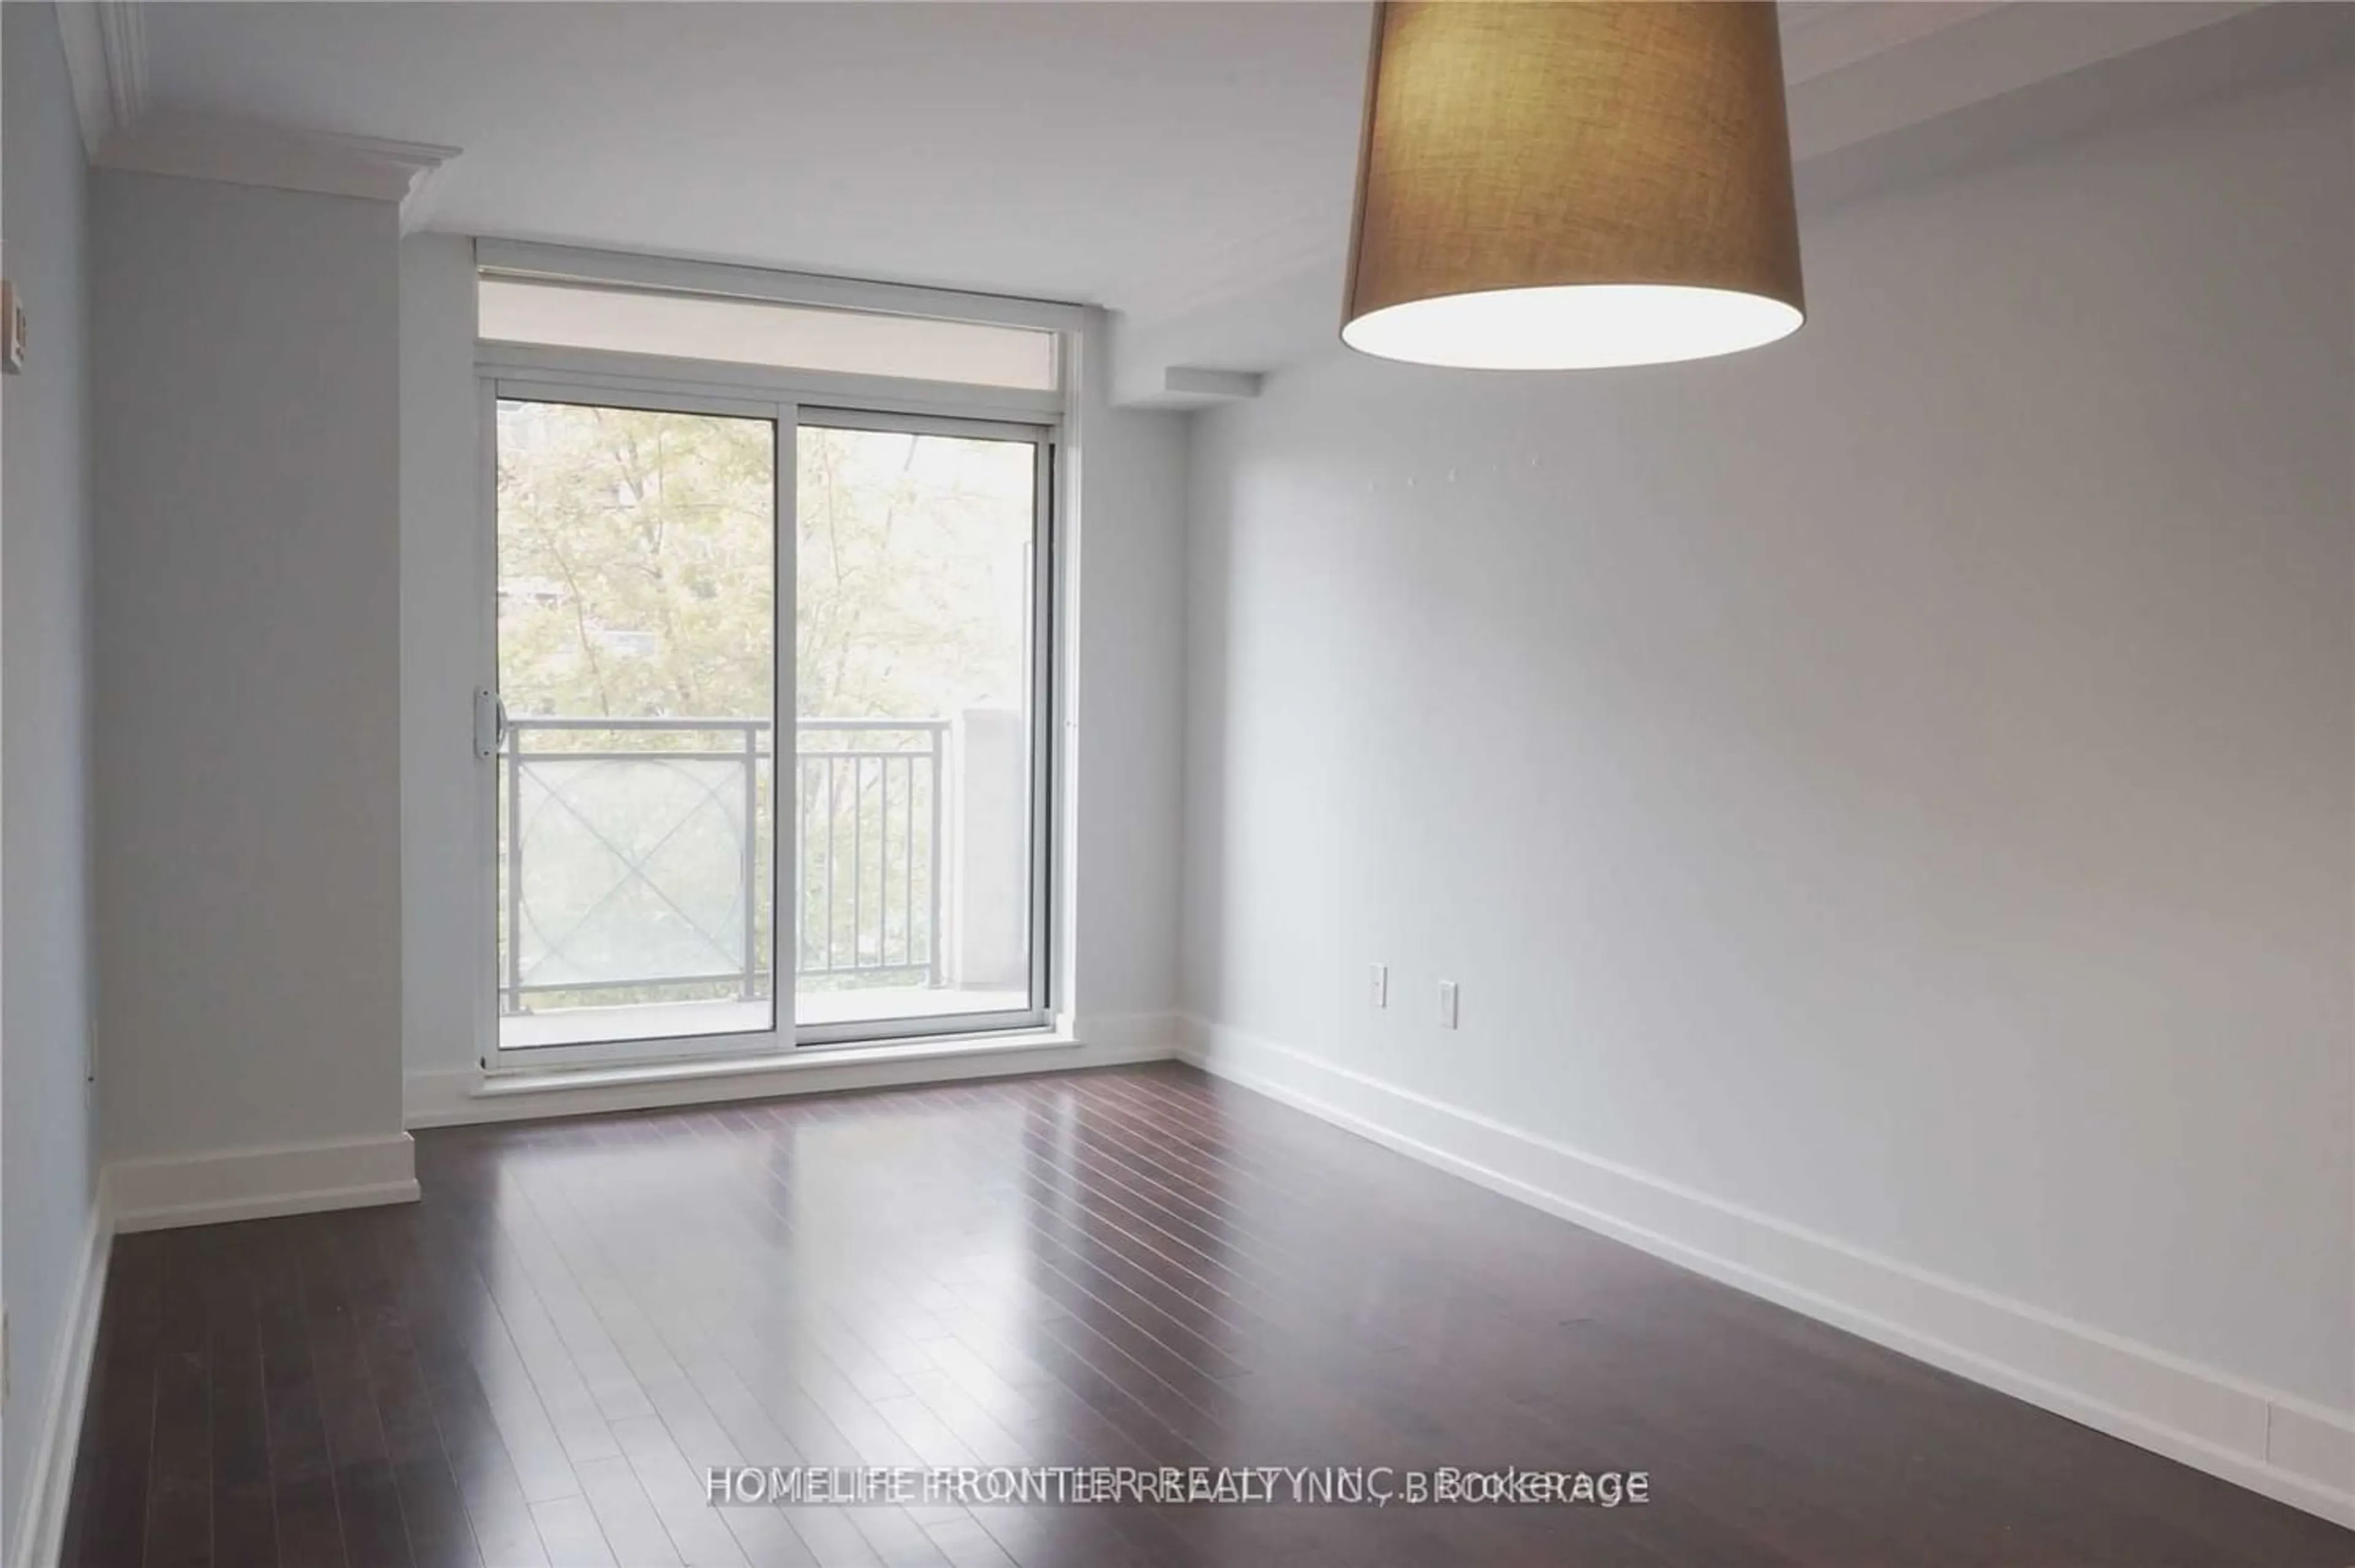 A pic of a room for 650 Sheppard Ave #218, Toronto Ontario M2K 1B7